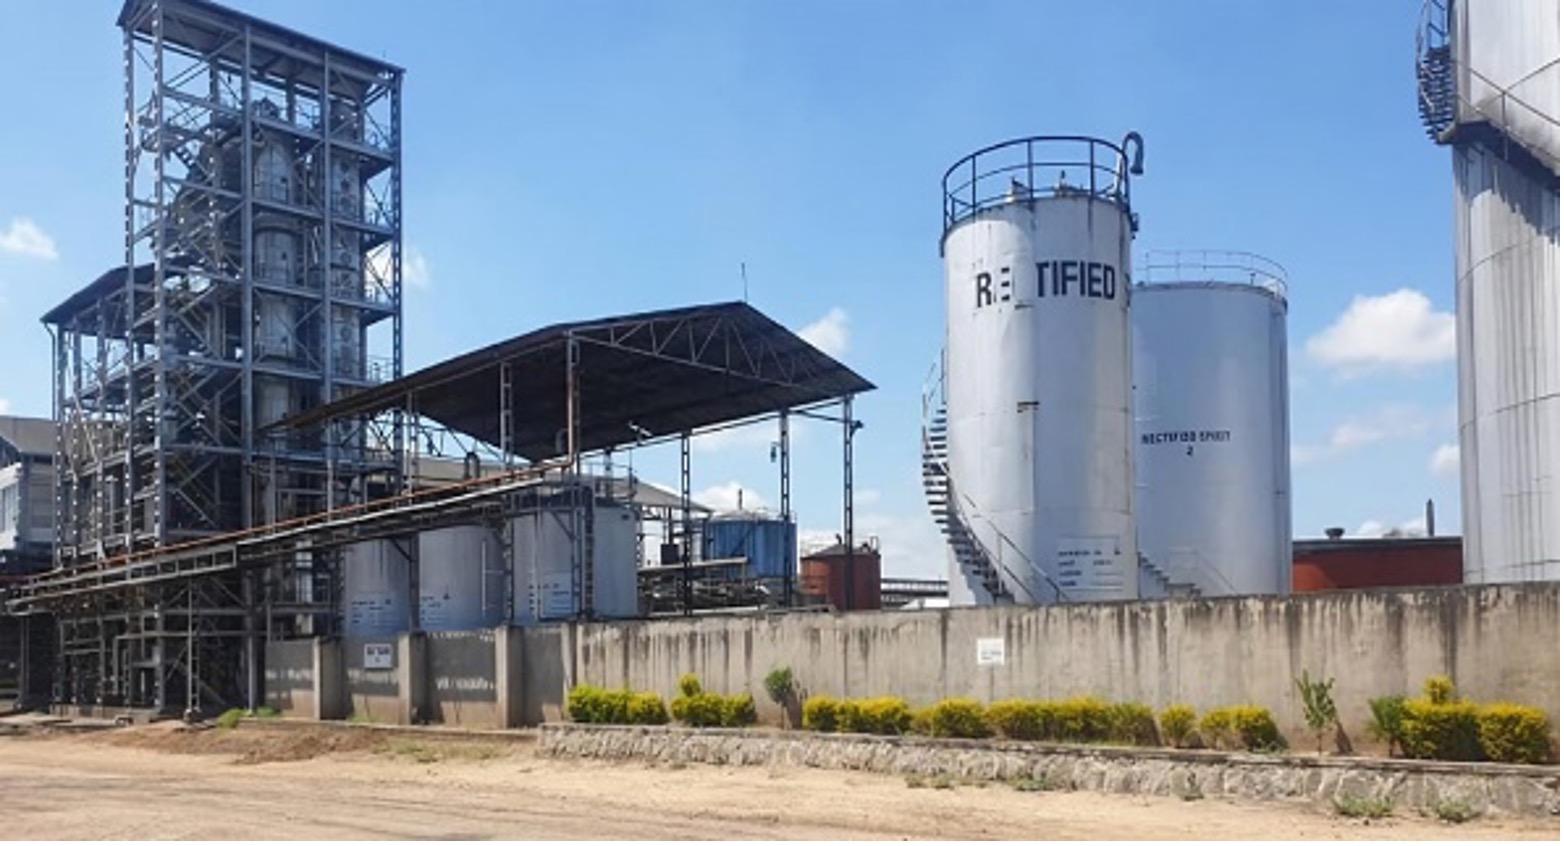 Producing biofuels with cogeneration in Malawi